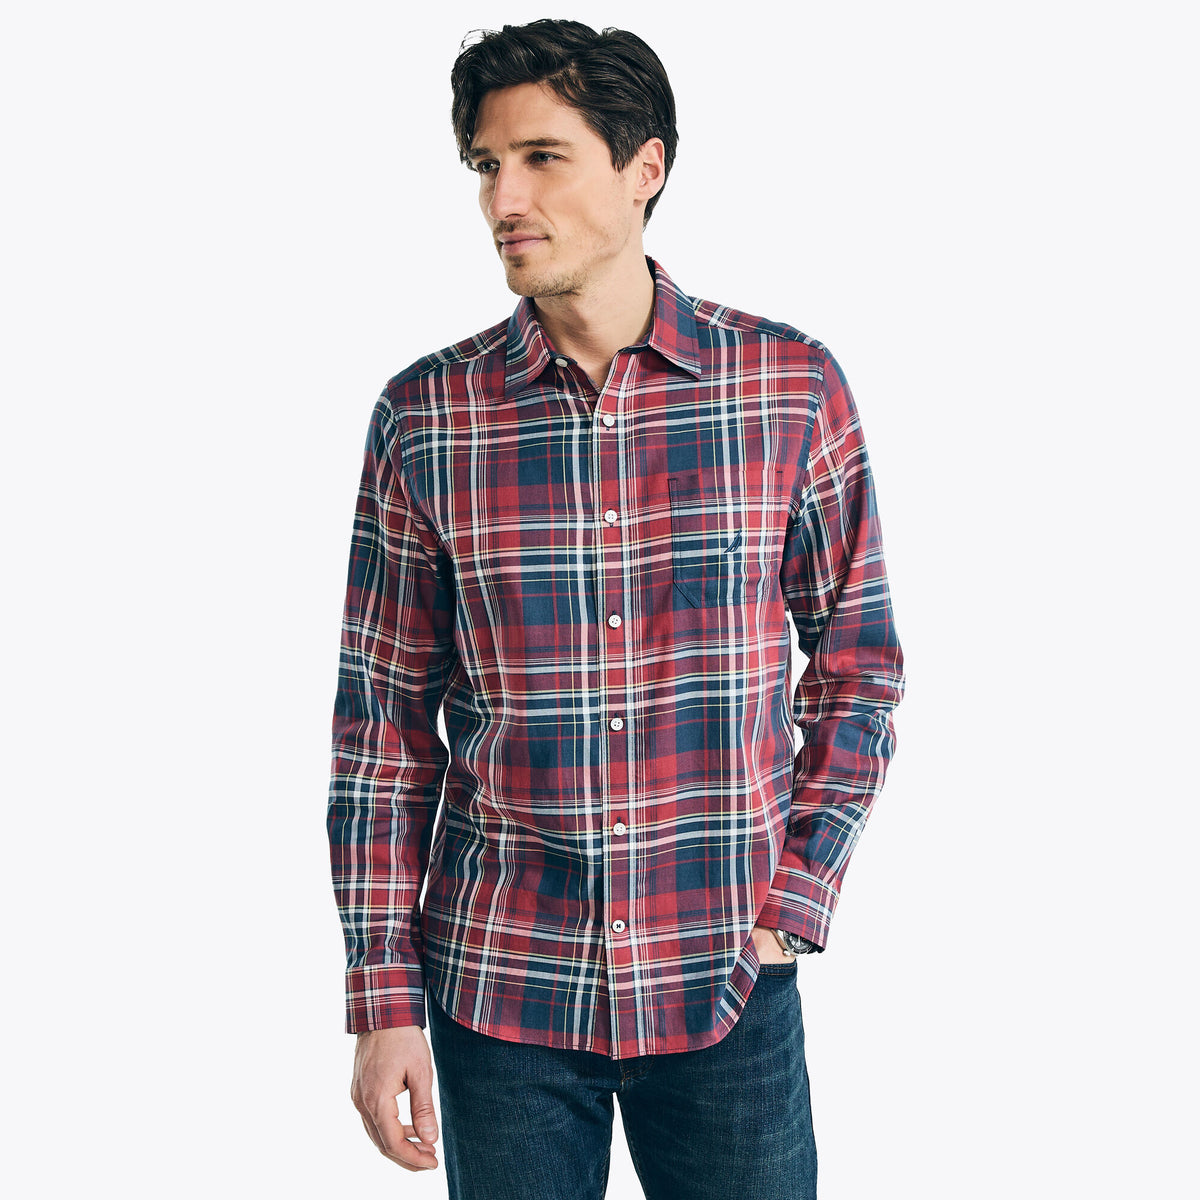 Nautica Men's Big & Tall Sustainably Crafted Plaid Shirt Indian Summer